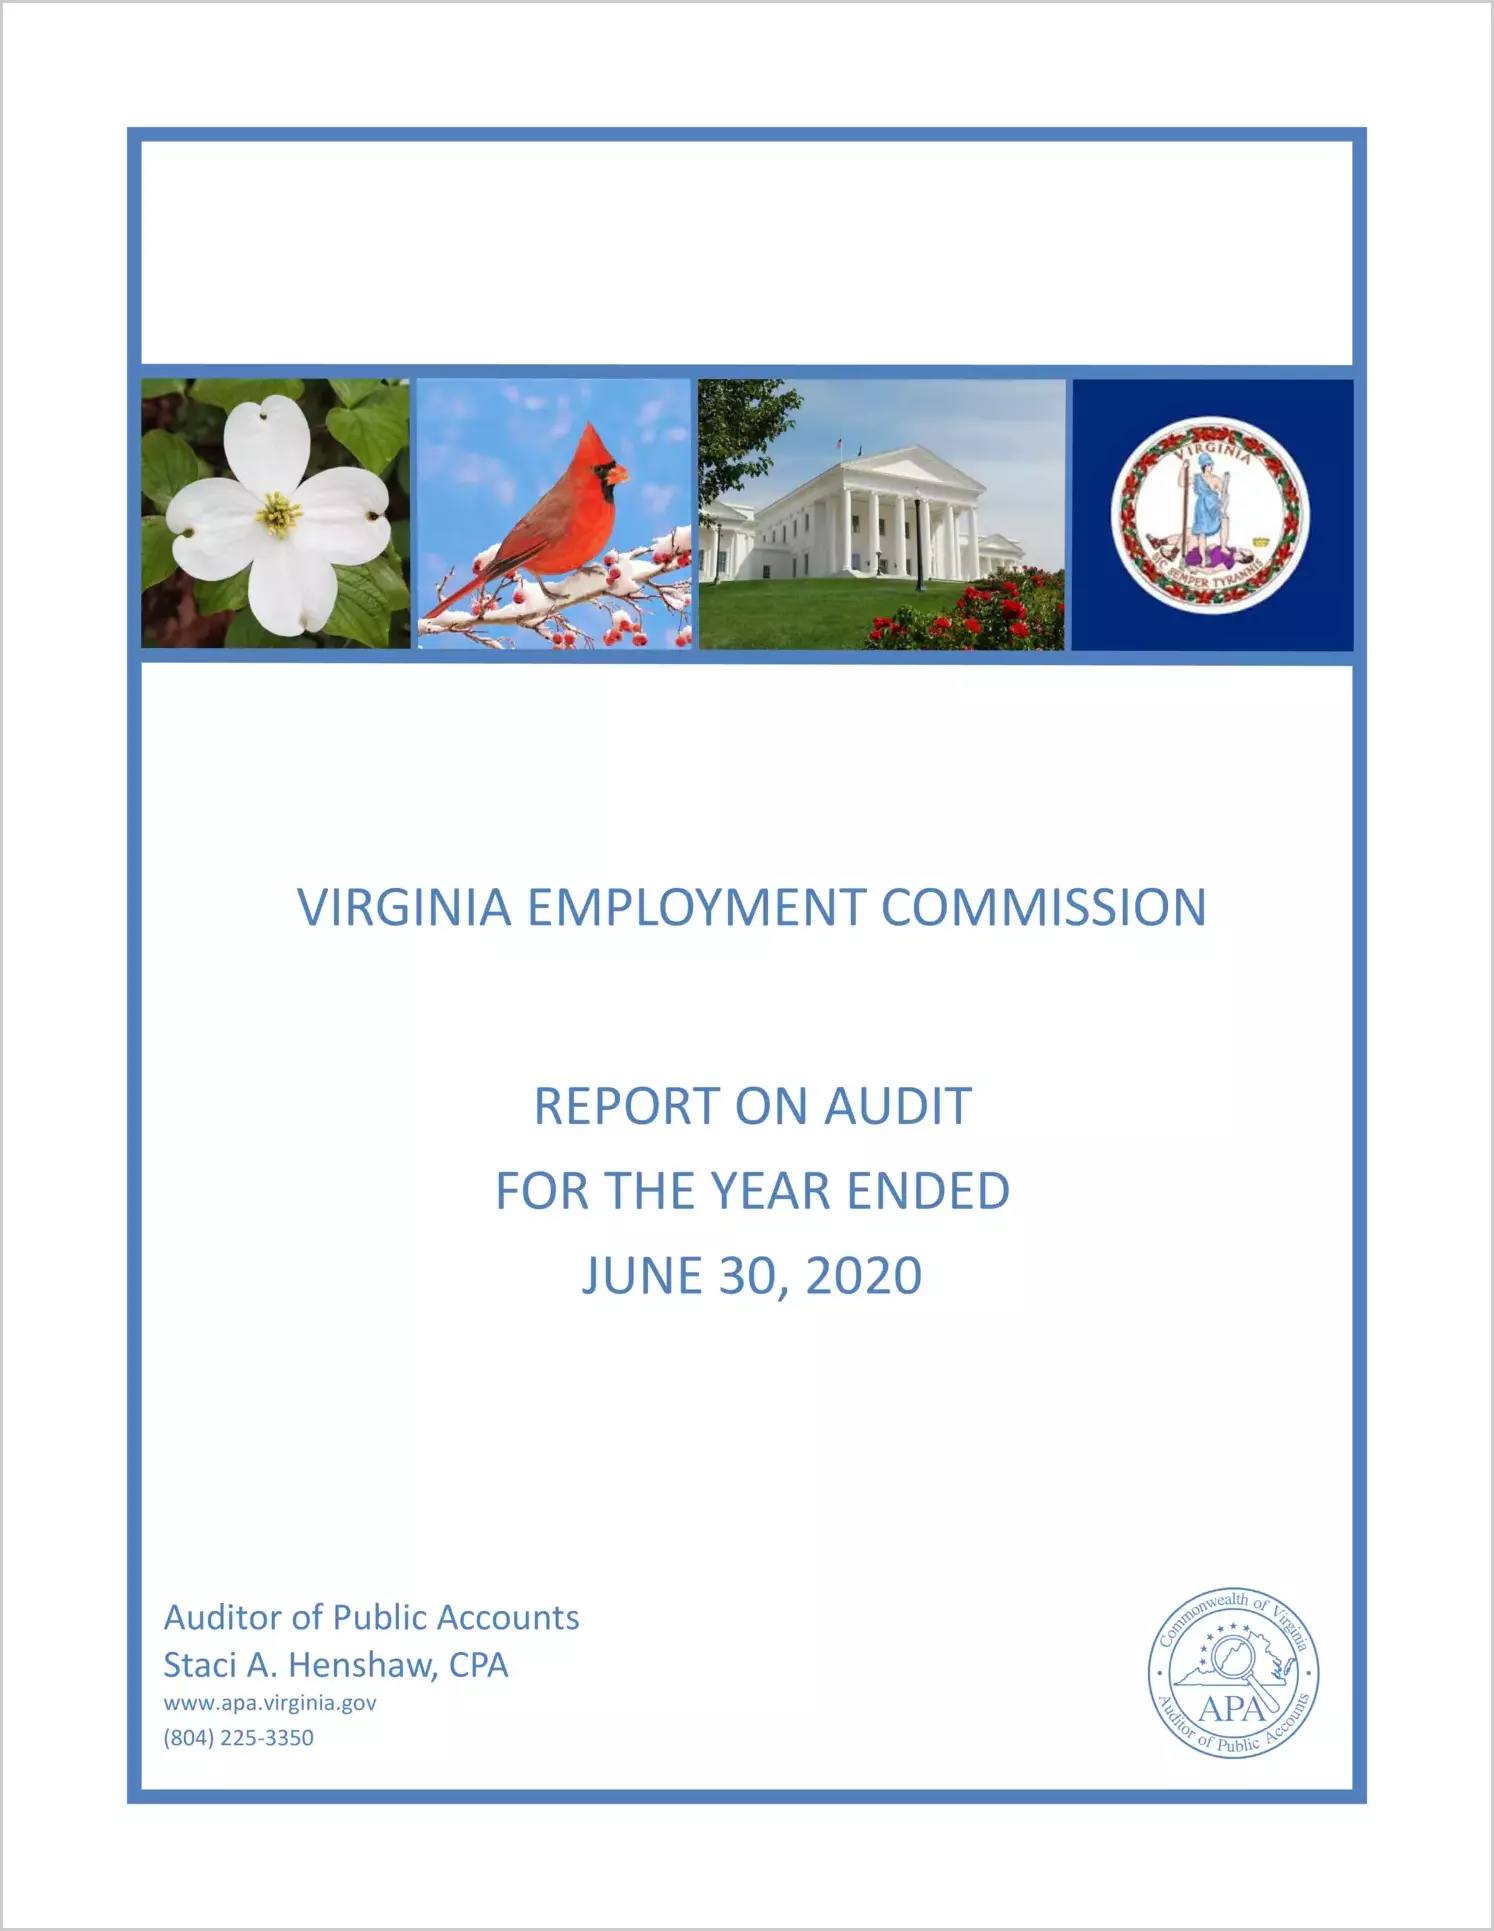 Virginia Employment Commission for the year ended June 30, 2020